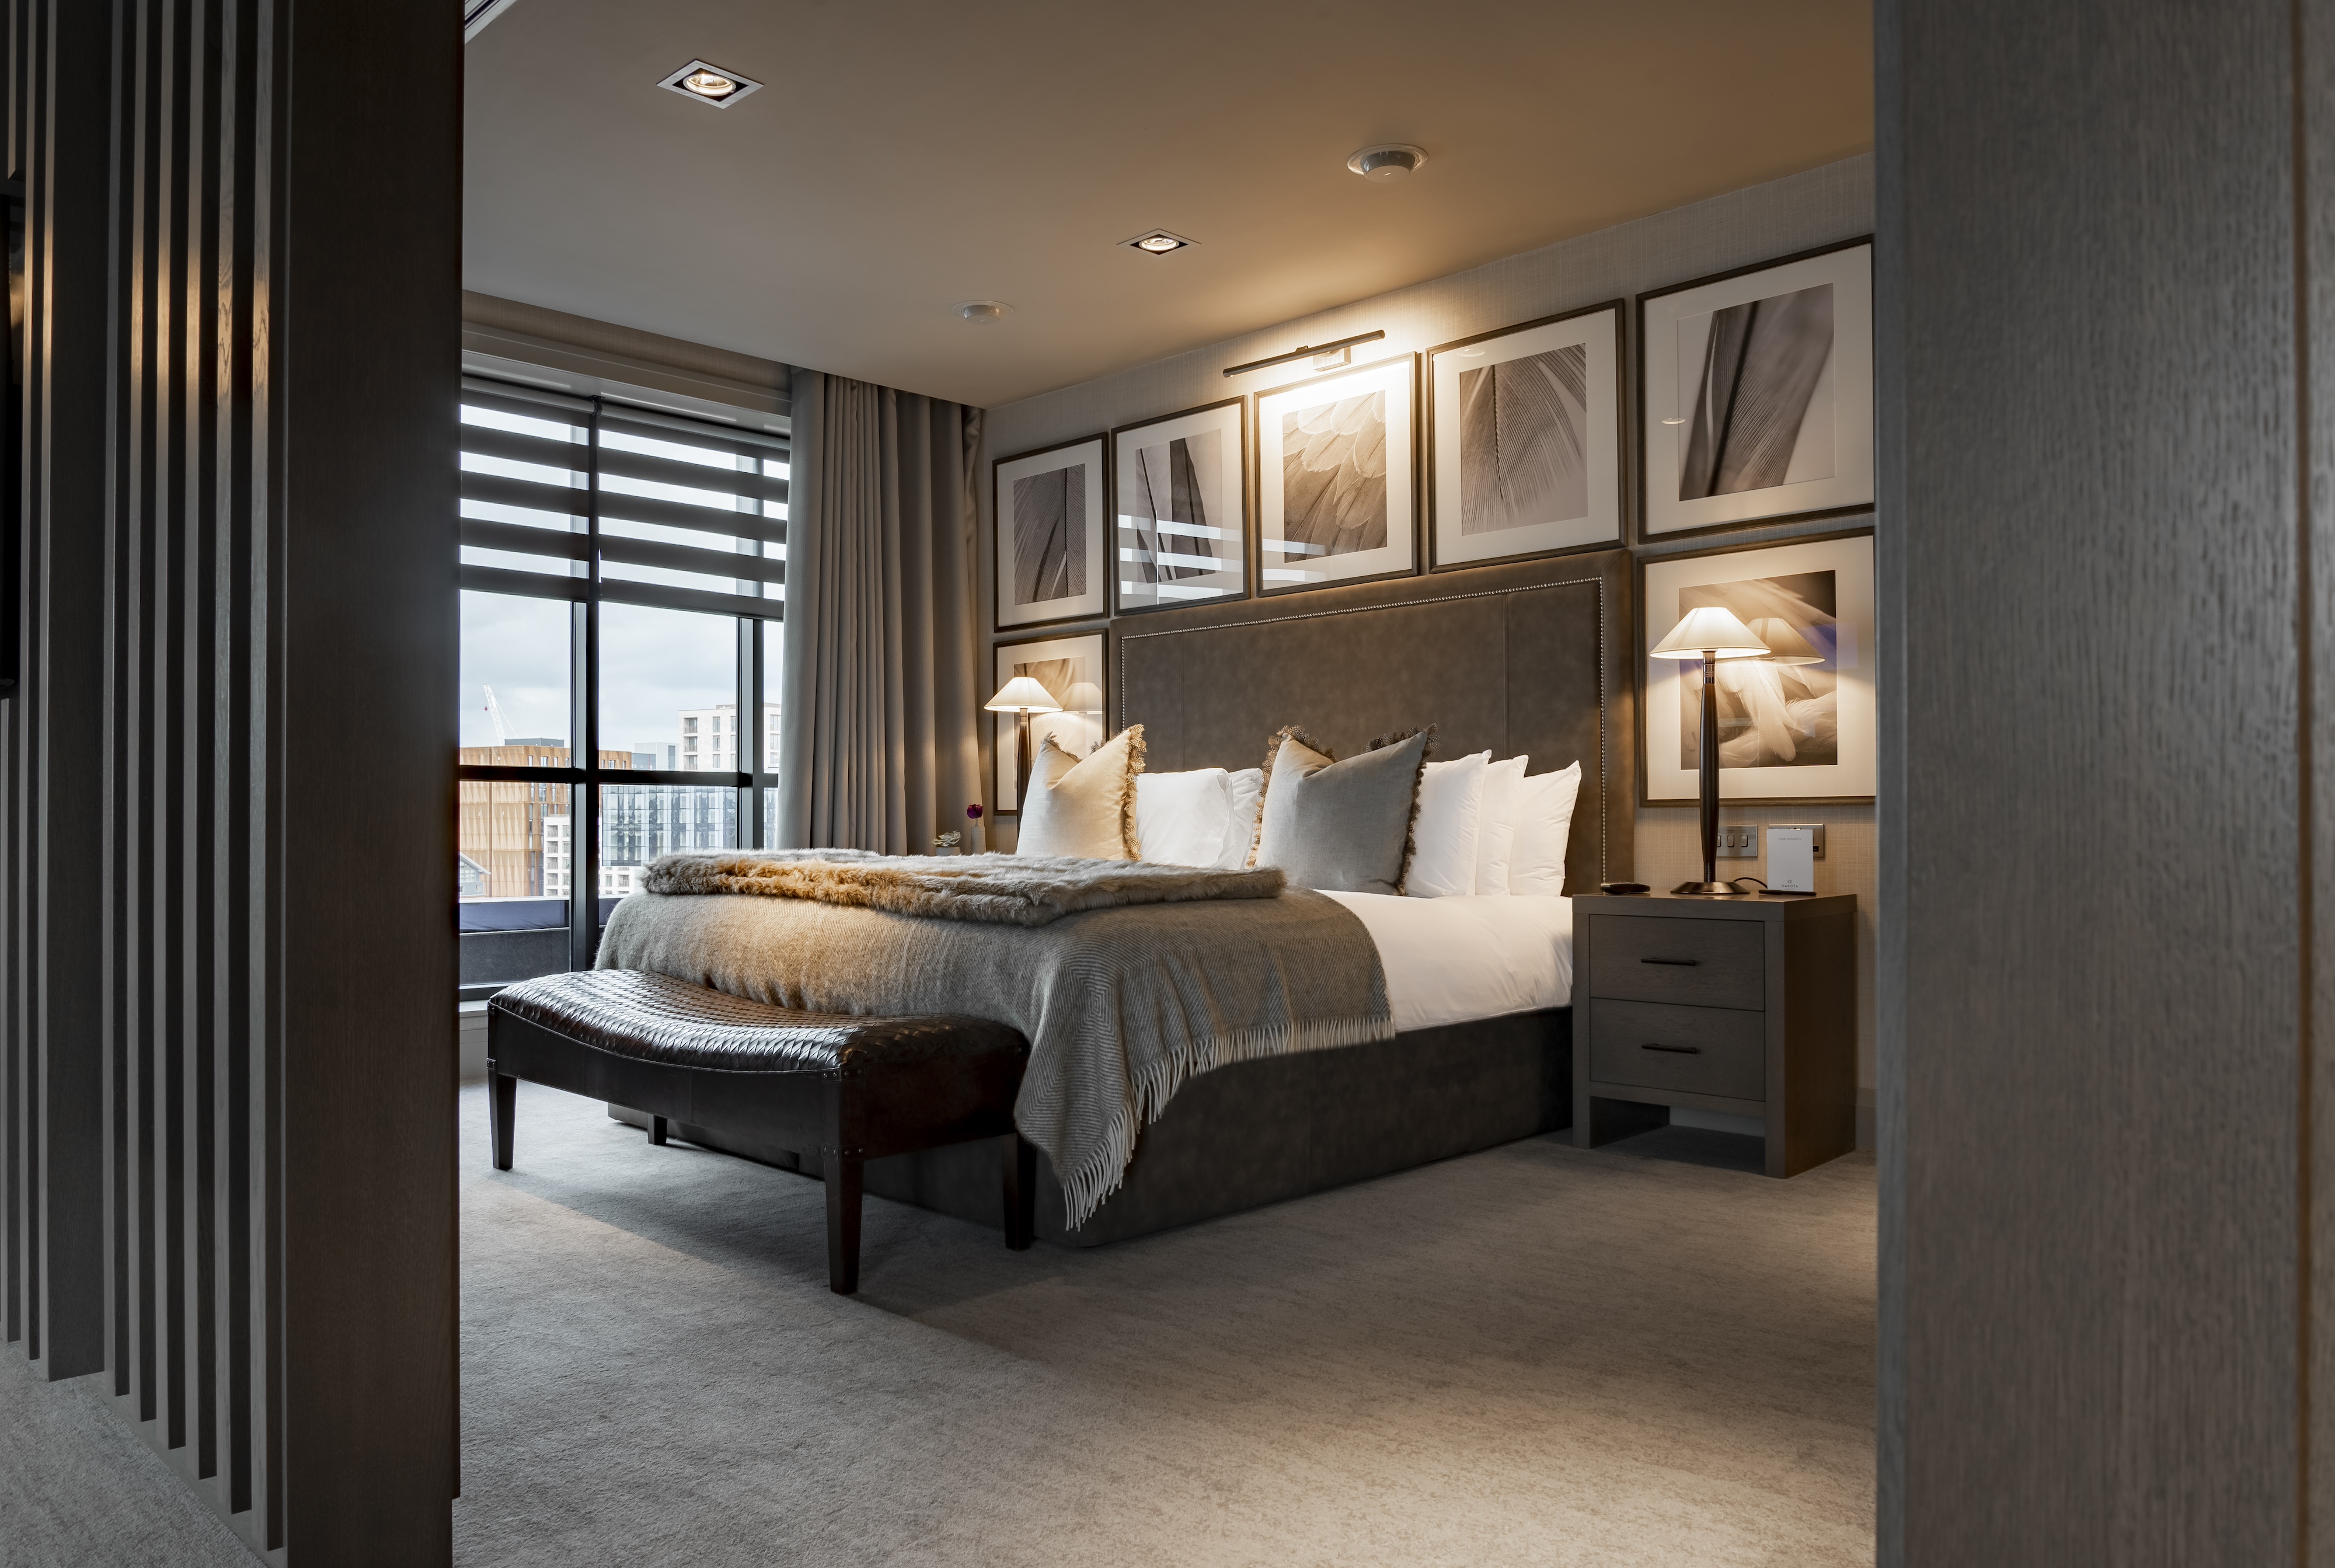 Image of grey and white themed hotel bedroom with large bed framed by large square photo frames.